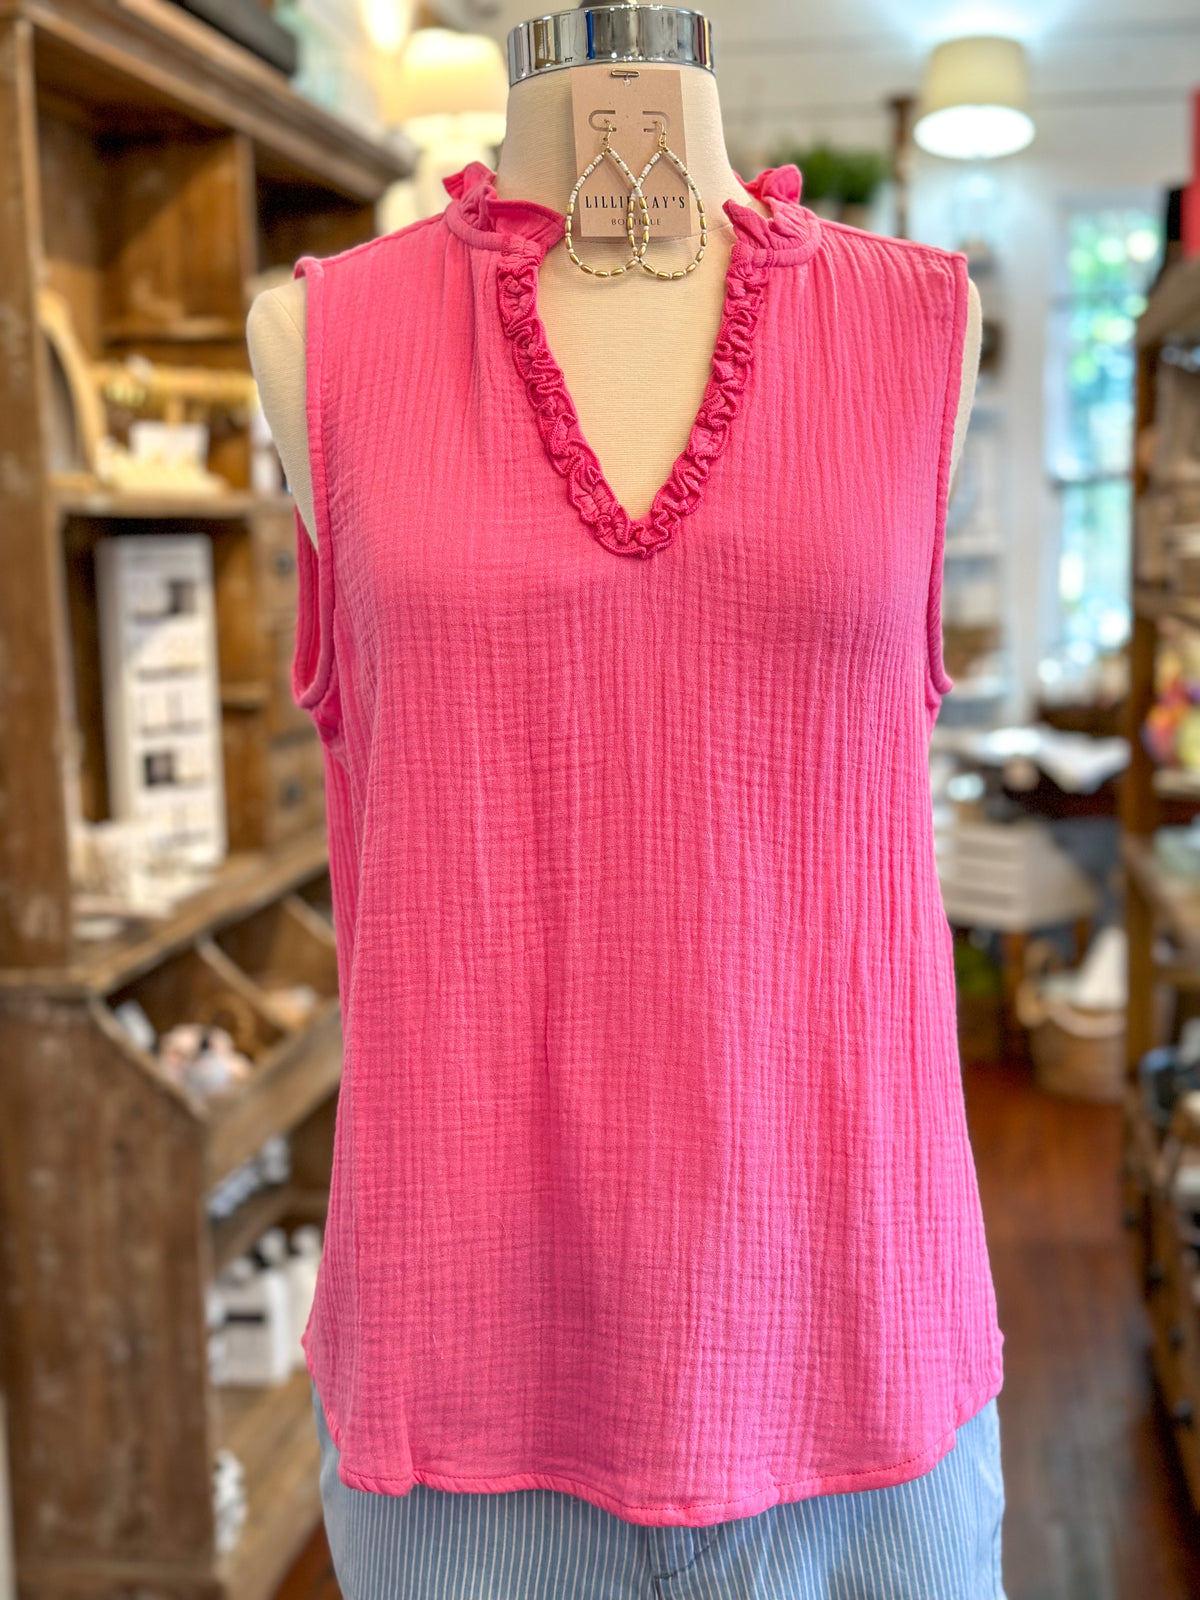 hot pink another love ruffle neckline top. cotton